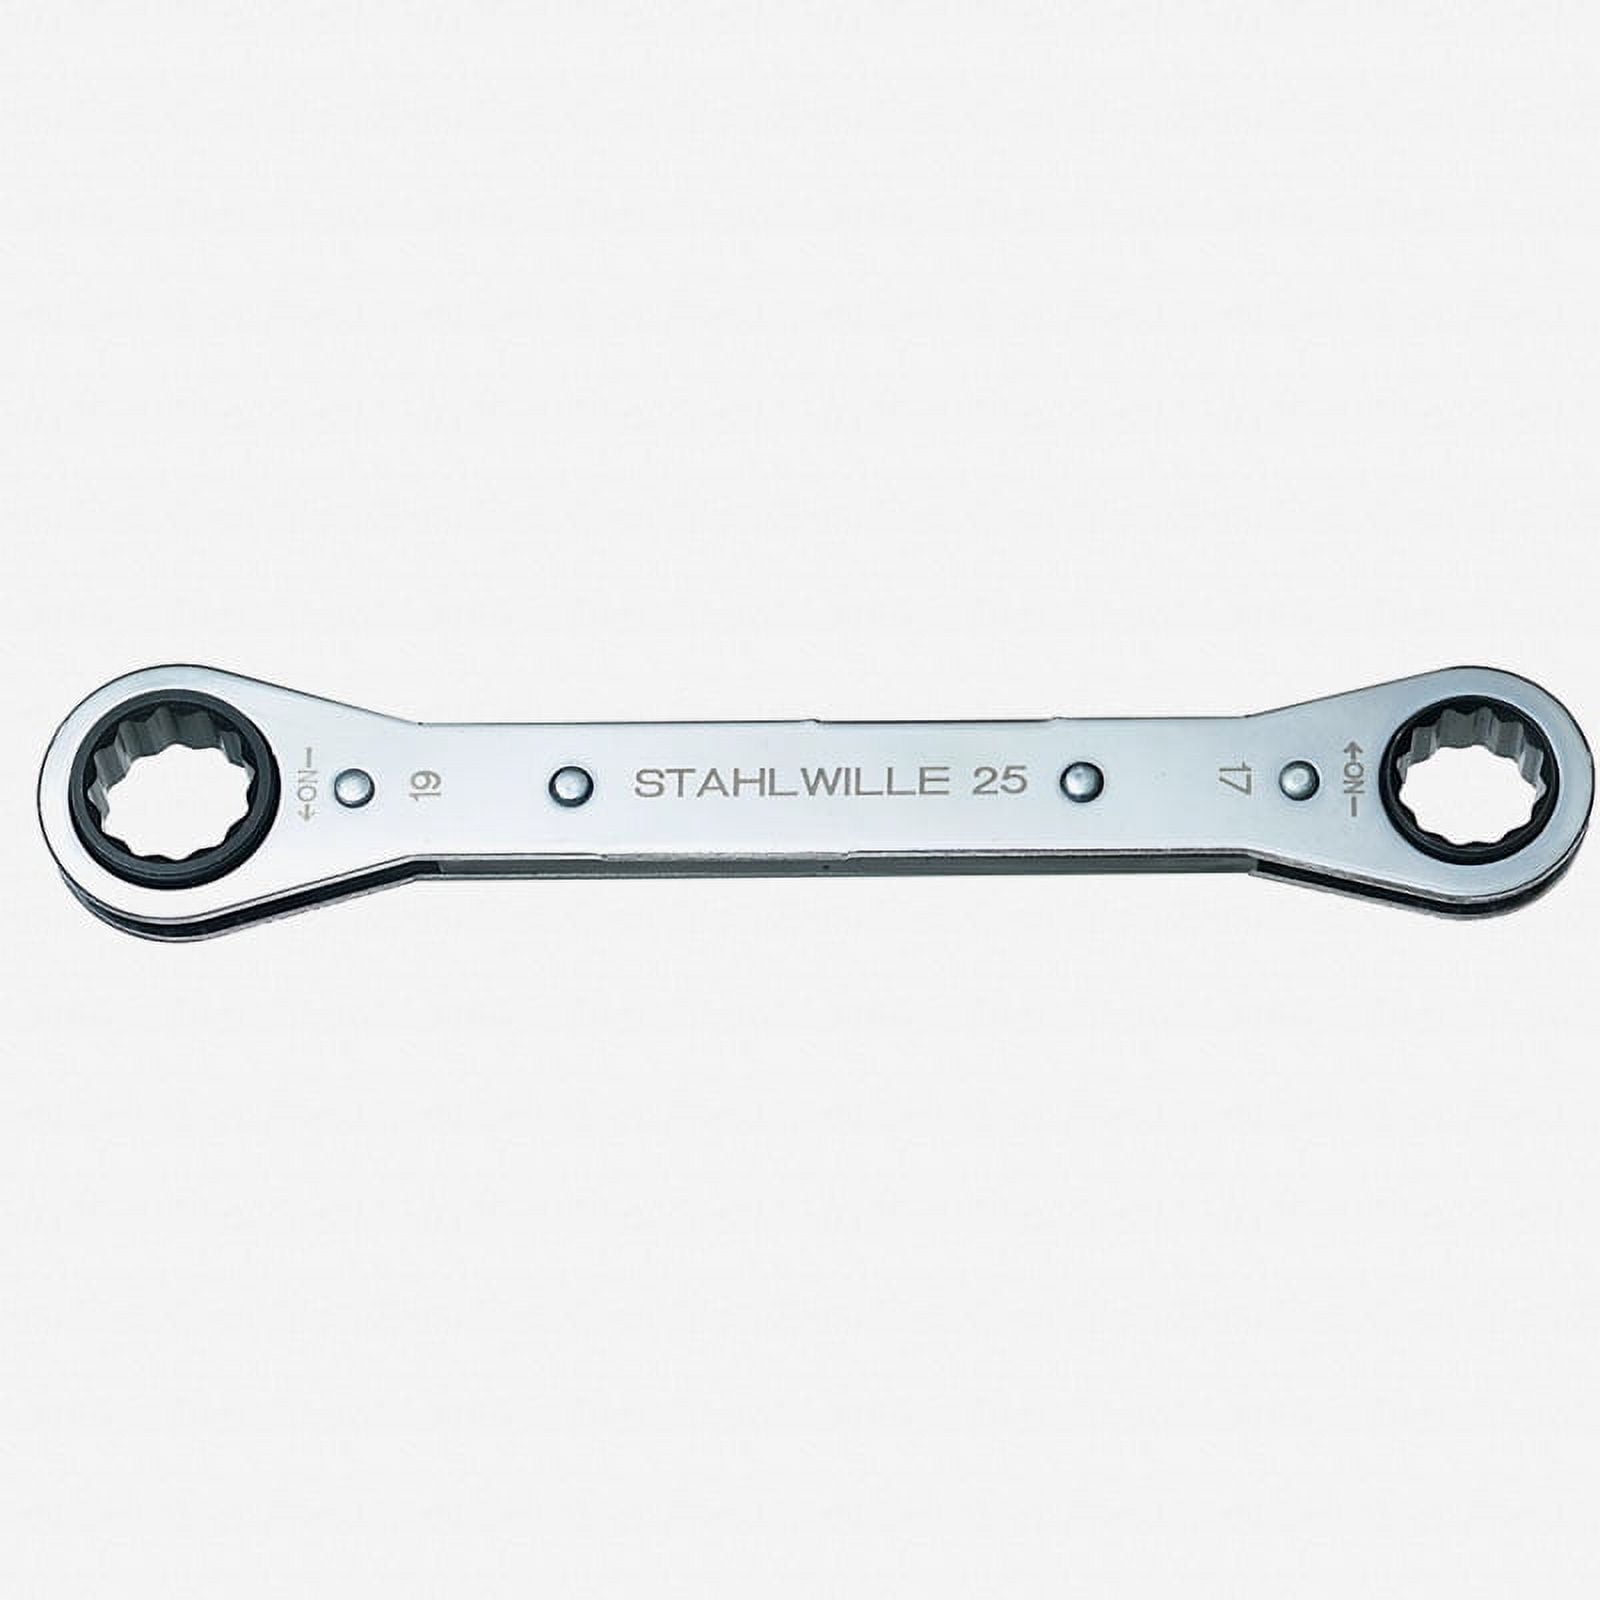 Stahlwille VP14/8 Type 14 Combination Spanner Set Open Box Long Series 8  Piece Metric 8mm-19mm - Made in Germany - Combination Open Box Long,  Combination Open Box Long, Metric, Metric, Spanners, Spanners